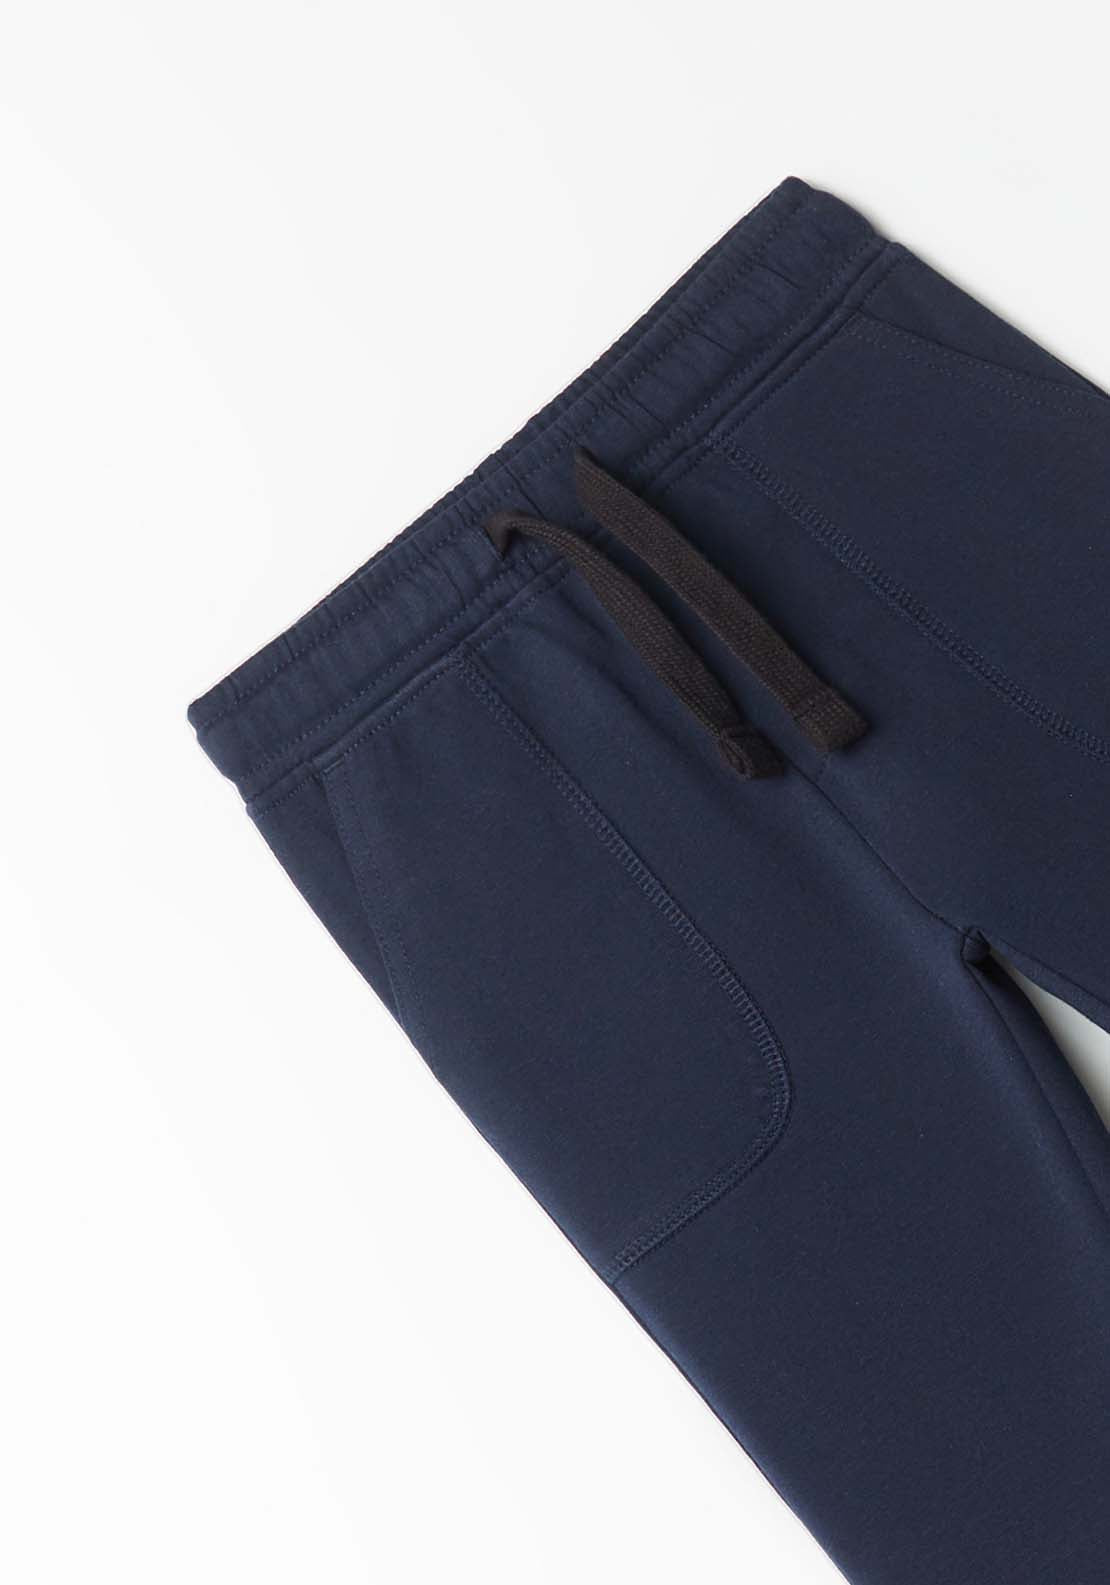 Sfera Basic Joggers With Pockets - Navy / Blue 4 Shaws Department Stores